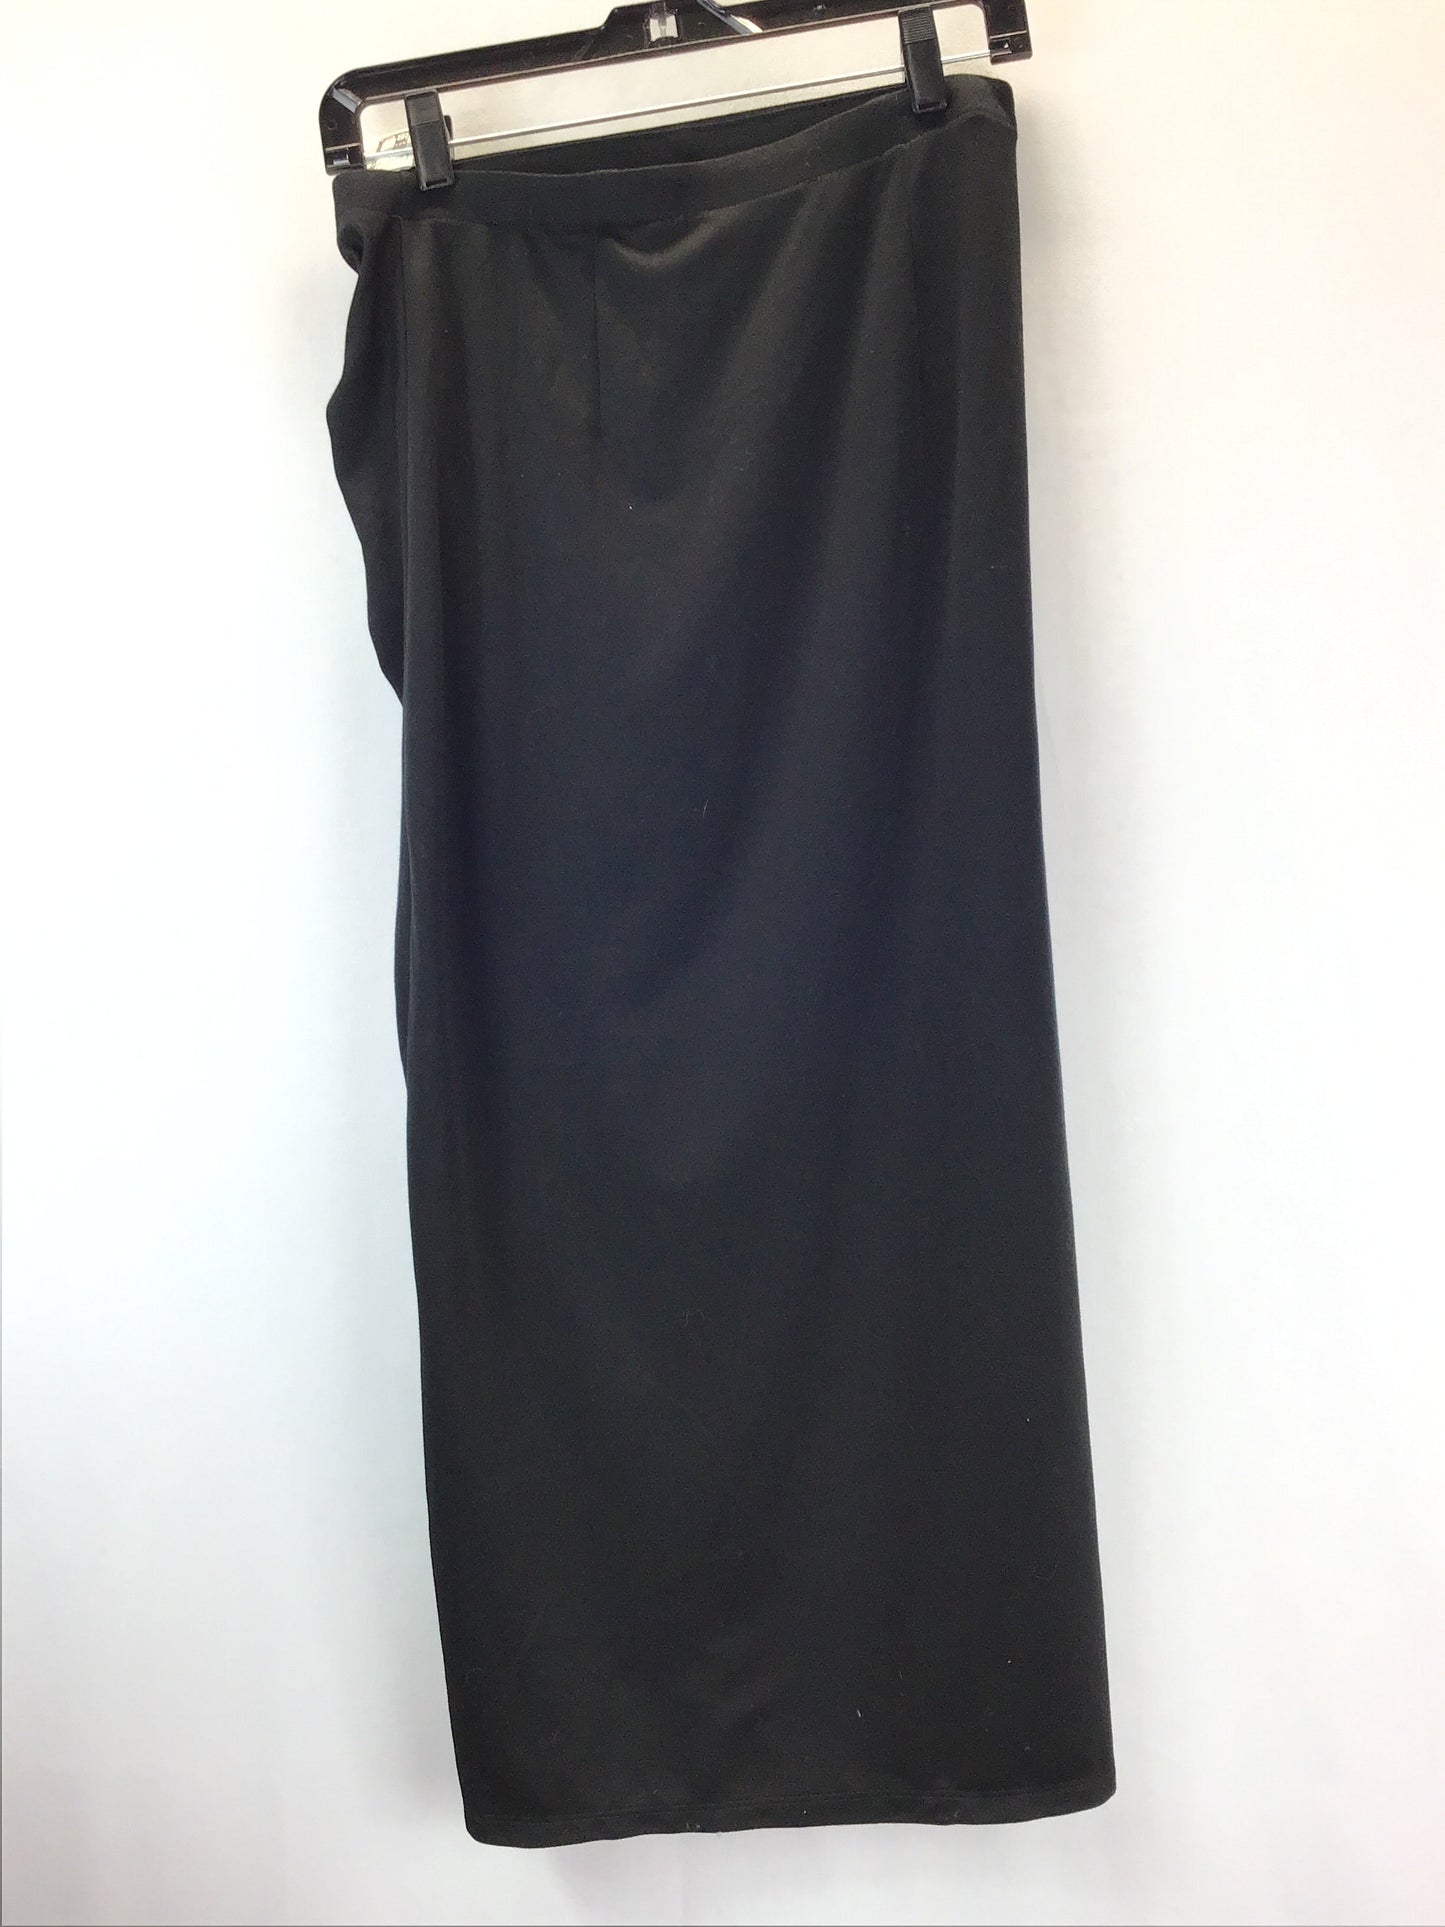 Skirt Maxi By Marc New York  Size: S